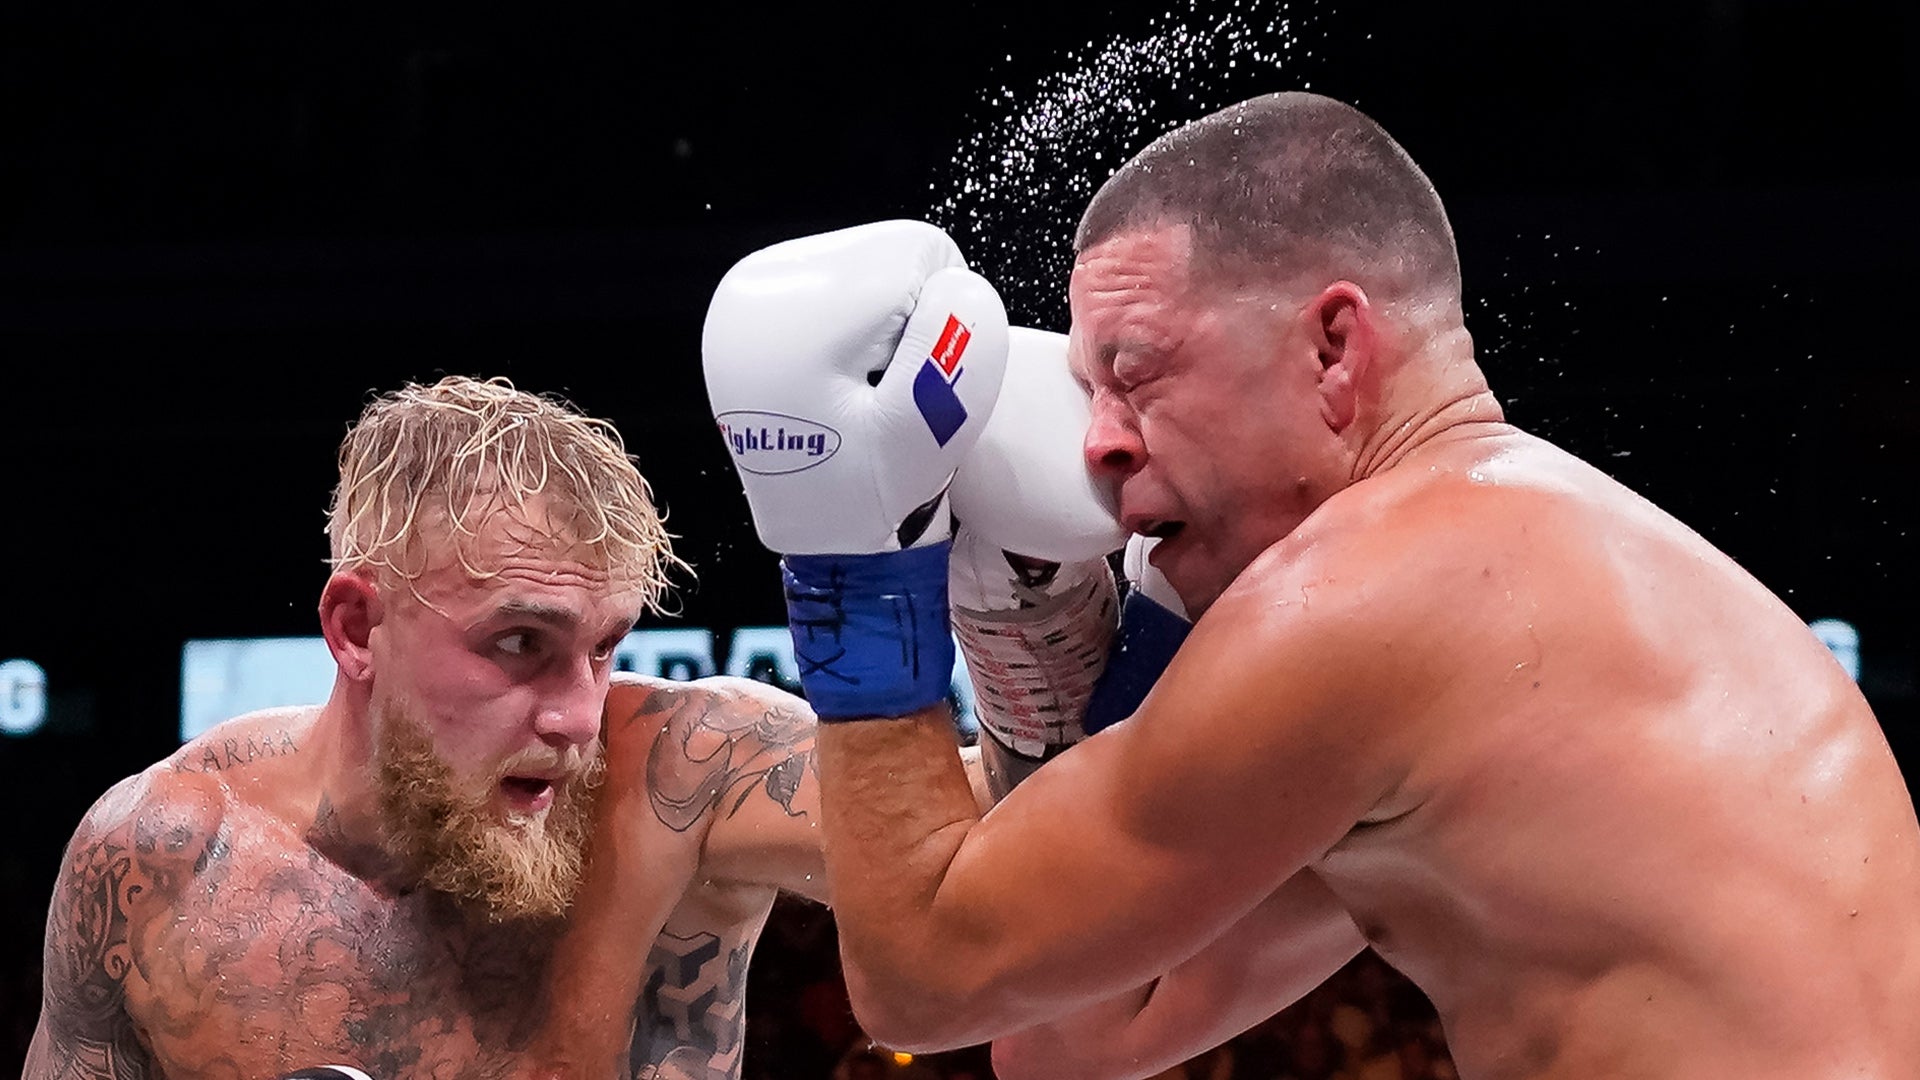 Jake Paul Knocks Down Nate Diaz and Beats MMA Star in 10-Round Boxing Match 